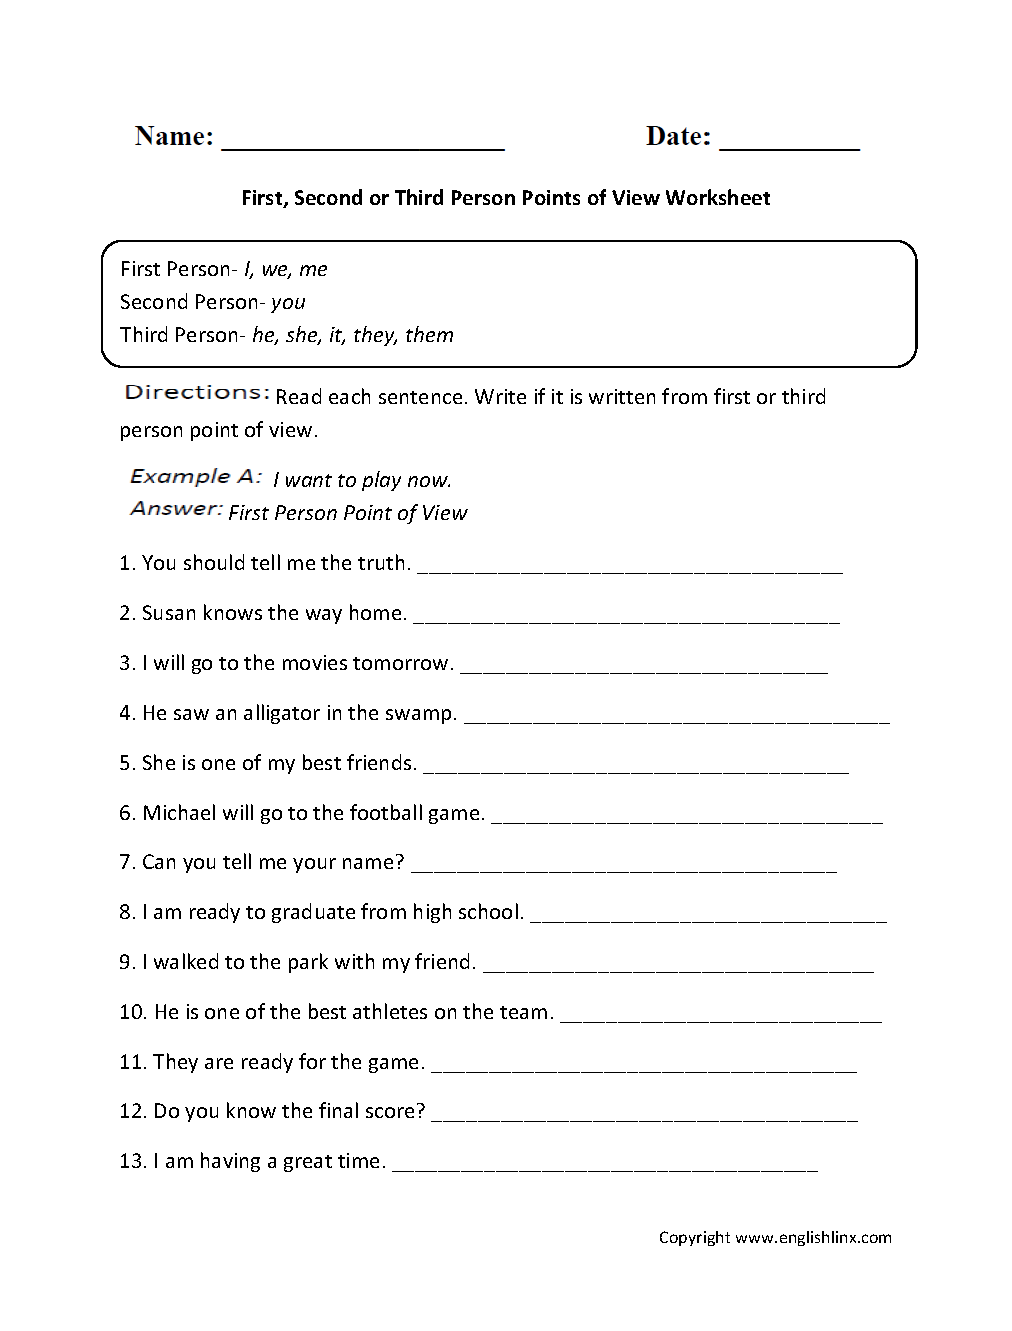 Third Person Point of View Worksheets Image